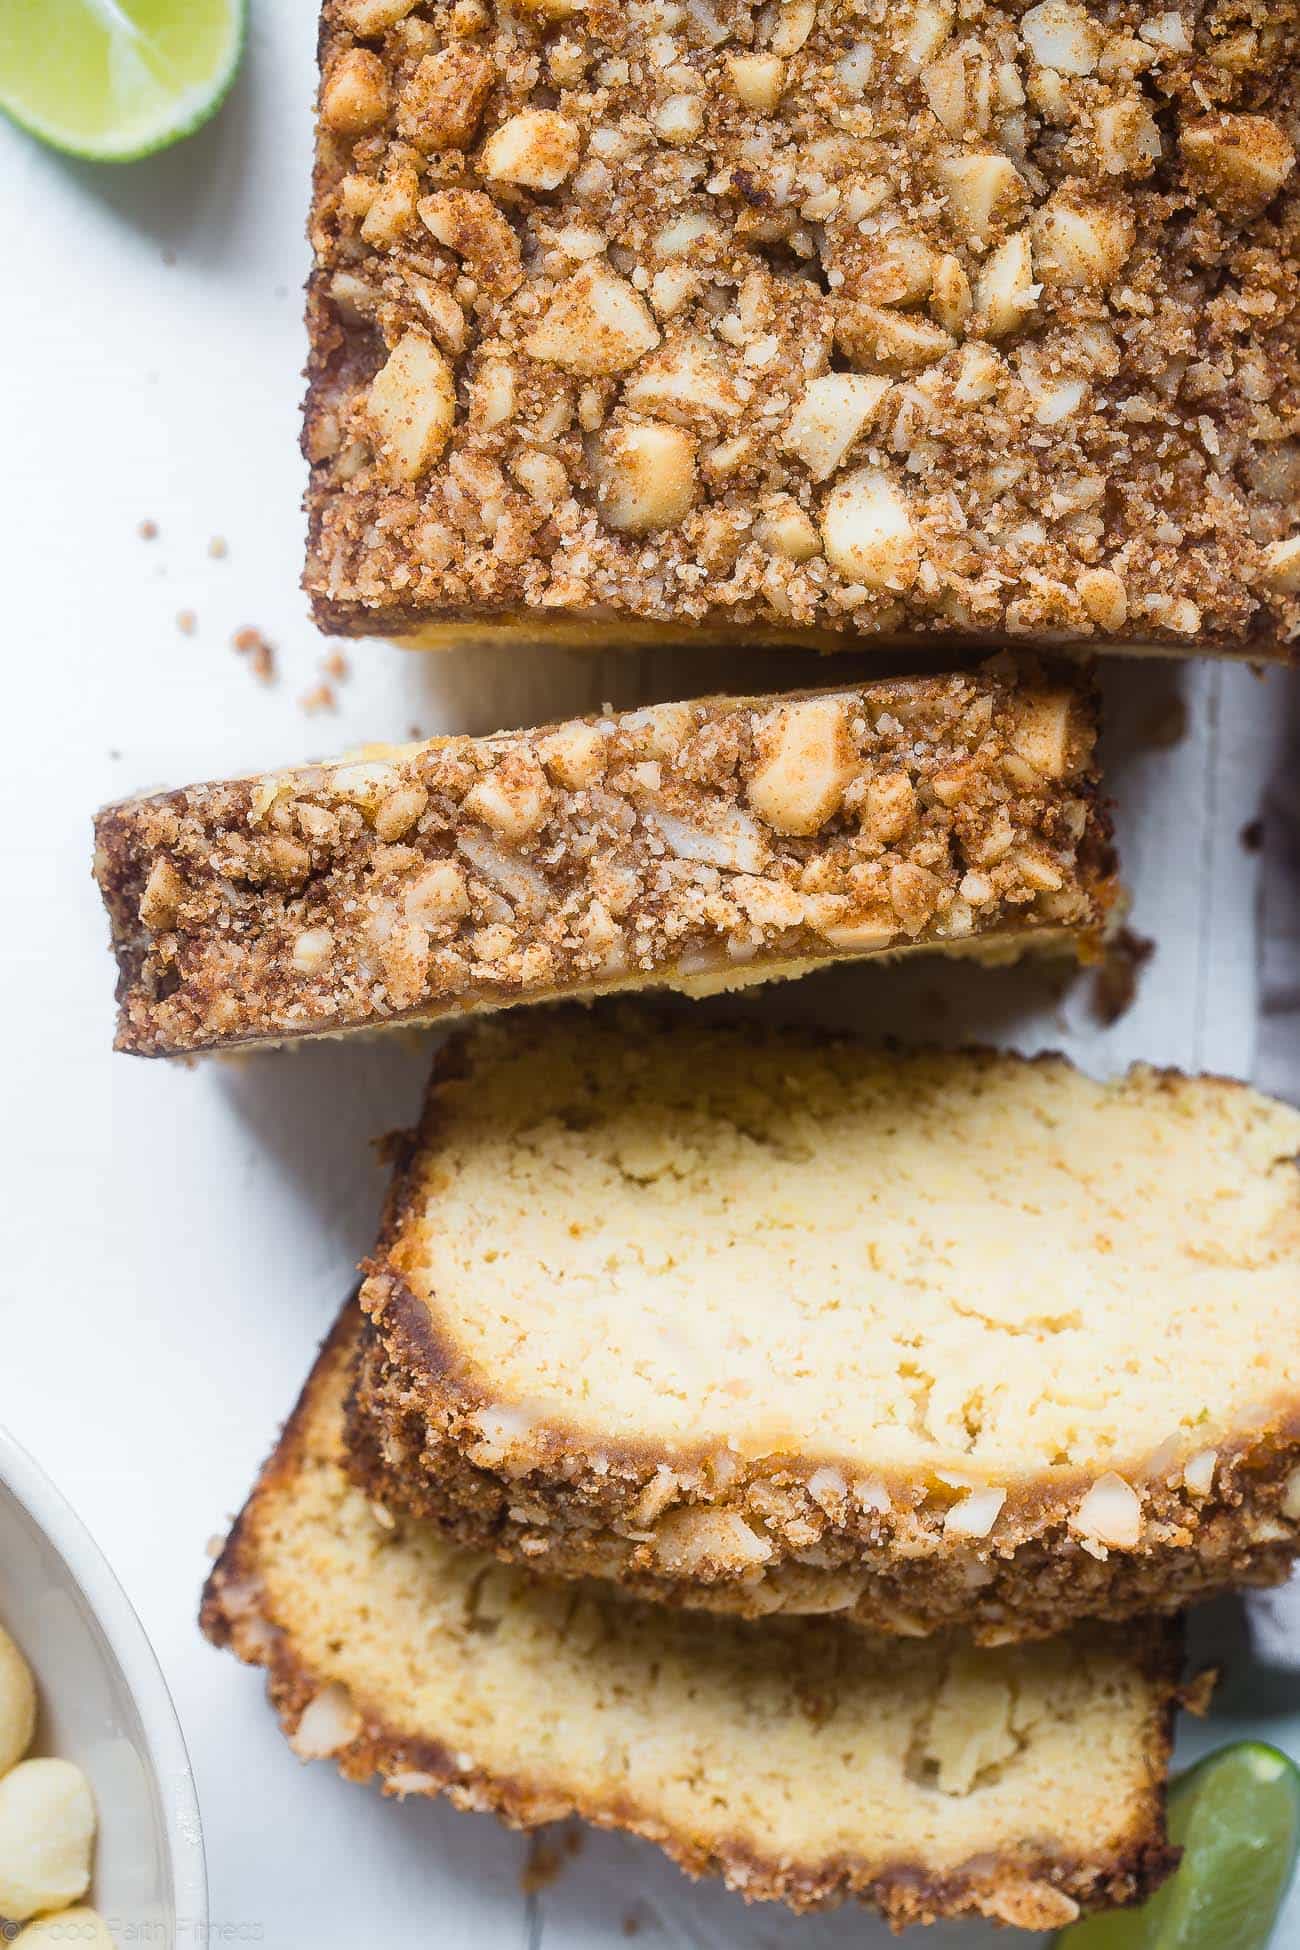 Paleo Pineapple Coconut Lime Bread - This healthy, paleo pineapple bread is a gluten, grain and dairy free summer treat! Complete with macadamia streusel, this will be a crowd pleaser! | Foodfaithfitness.com | @FoodFaithFit